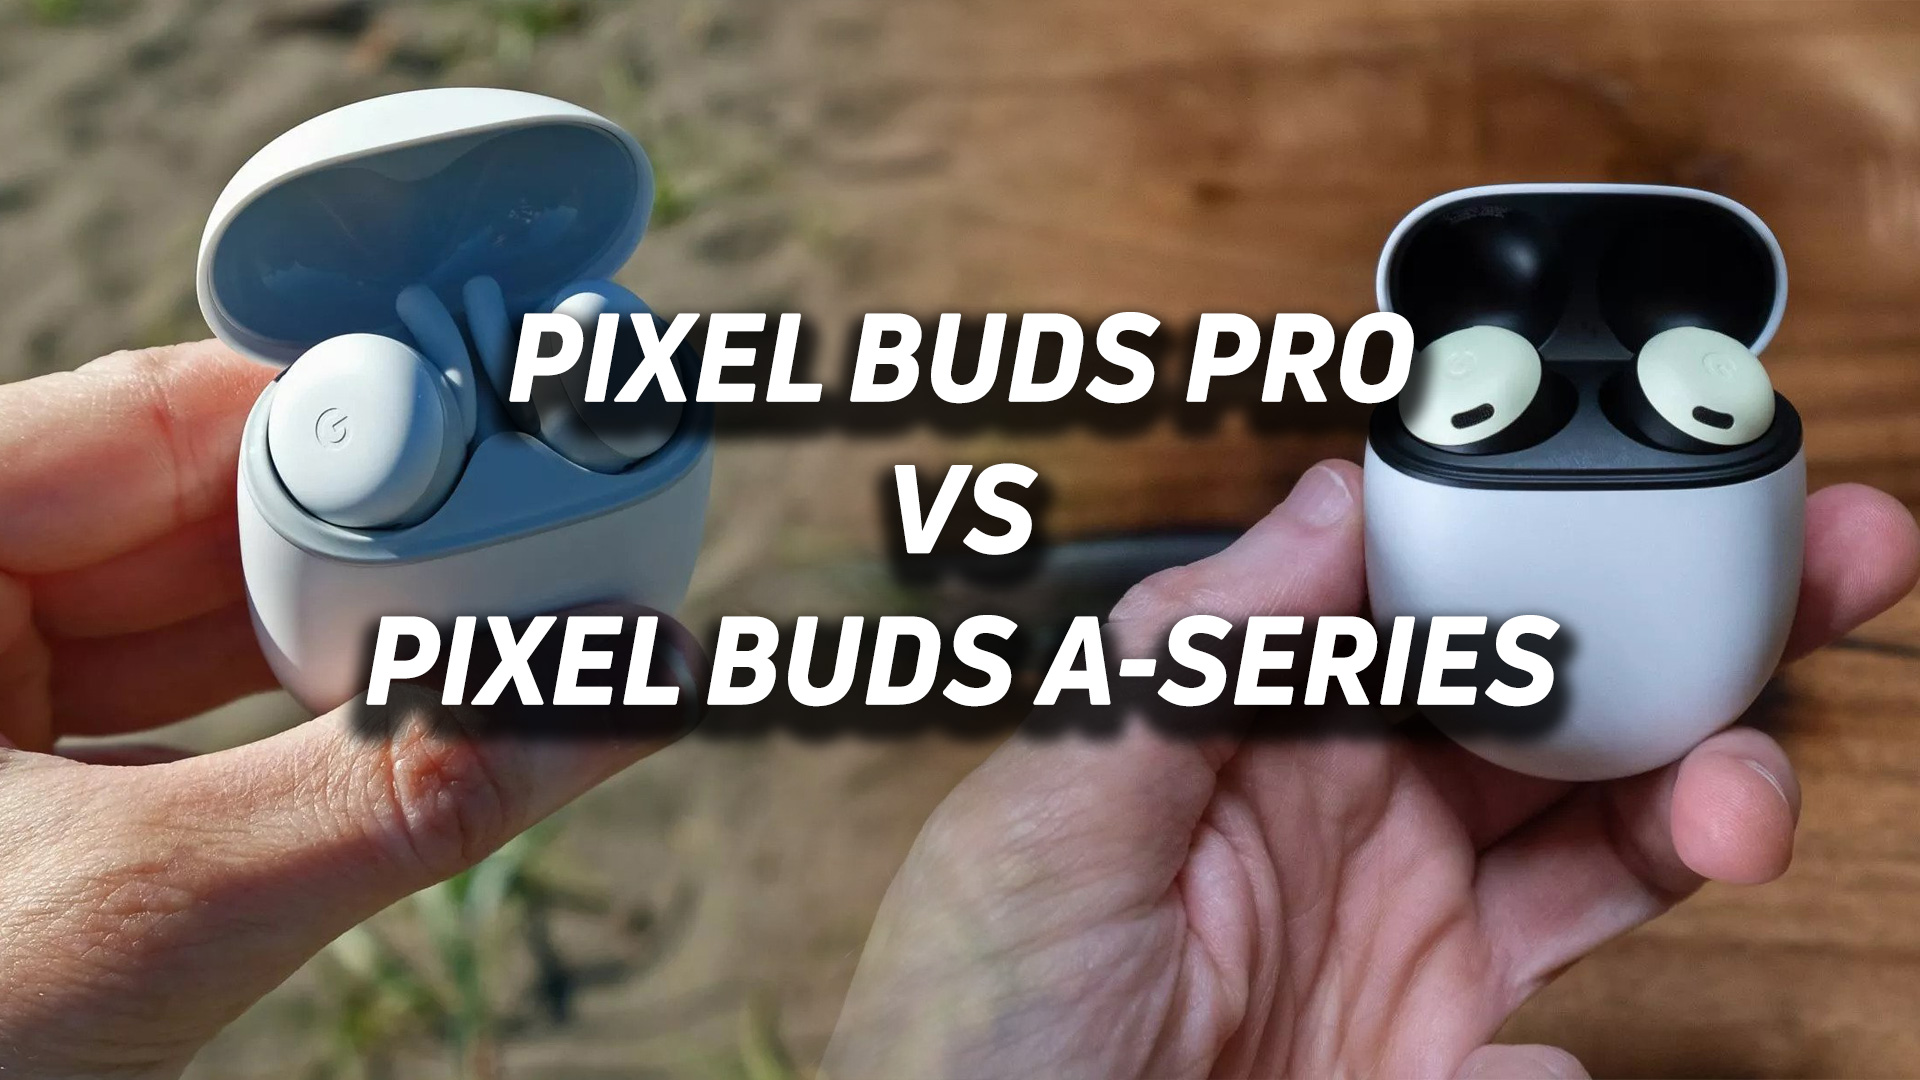 Google Pixel Buds Pro Reviews, Pros and Cons